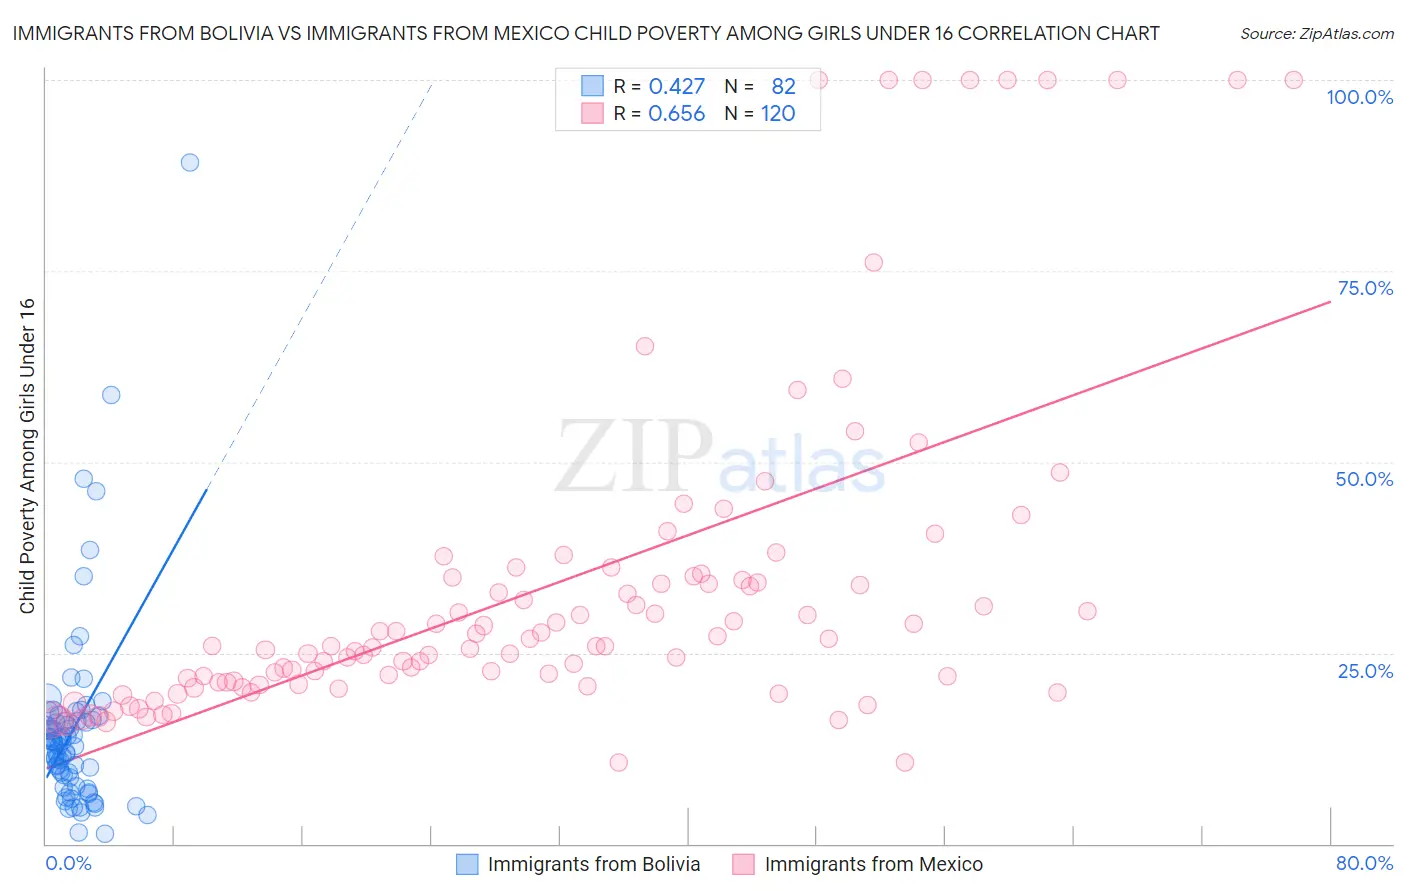 Immigrants from Bolivia vs Immigrants from Mexico Child Poverty Among Girls Under 16